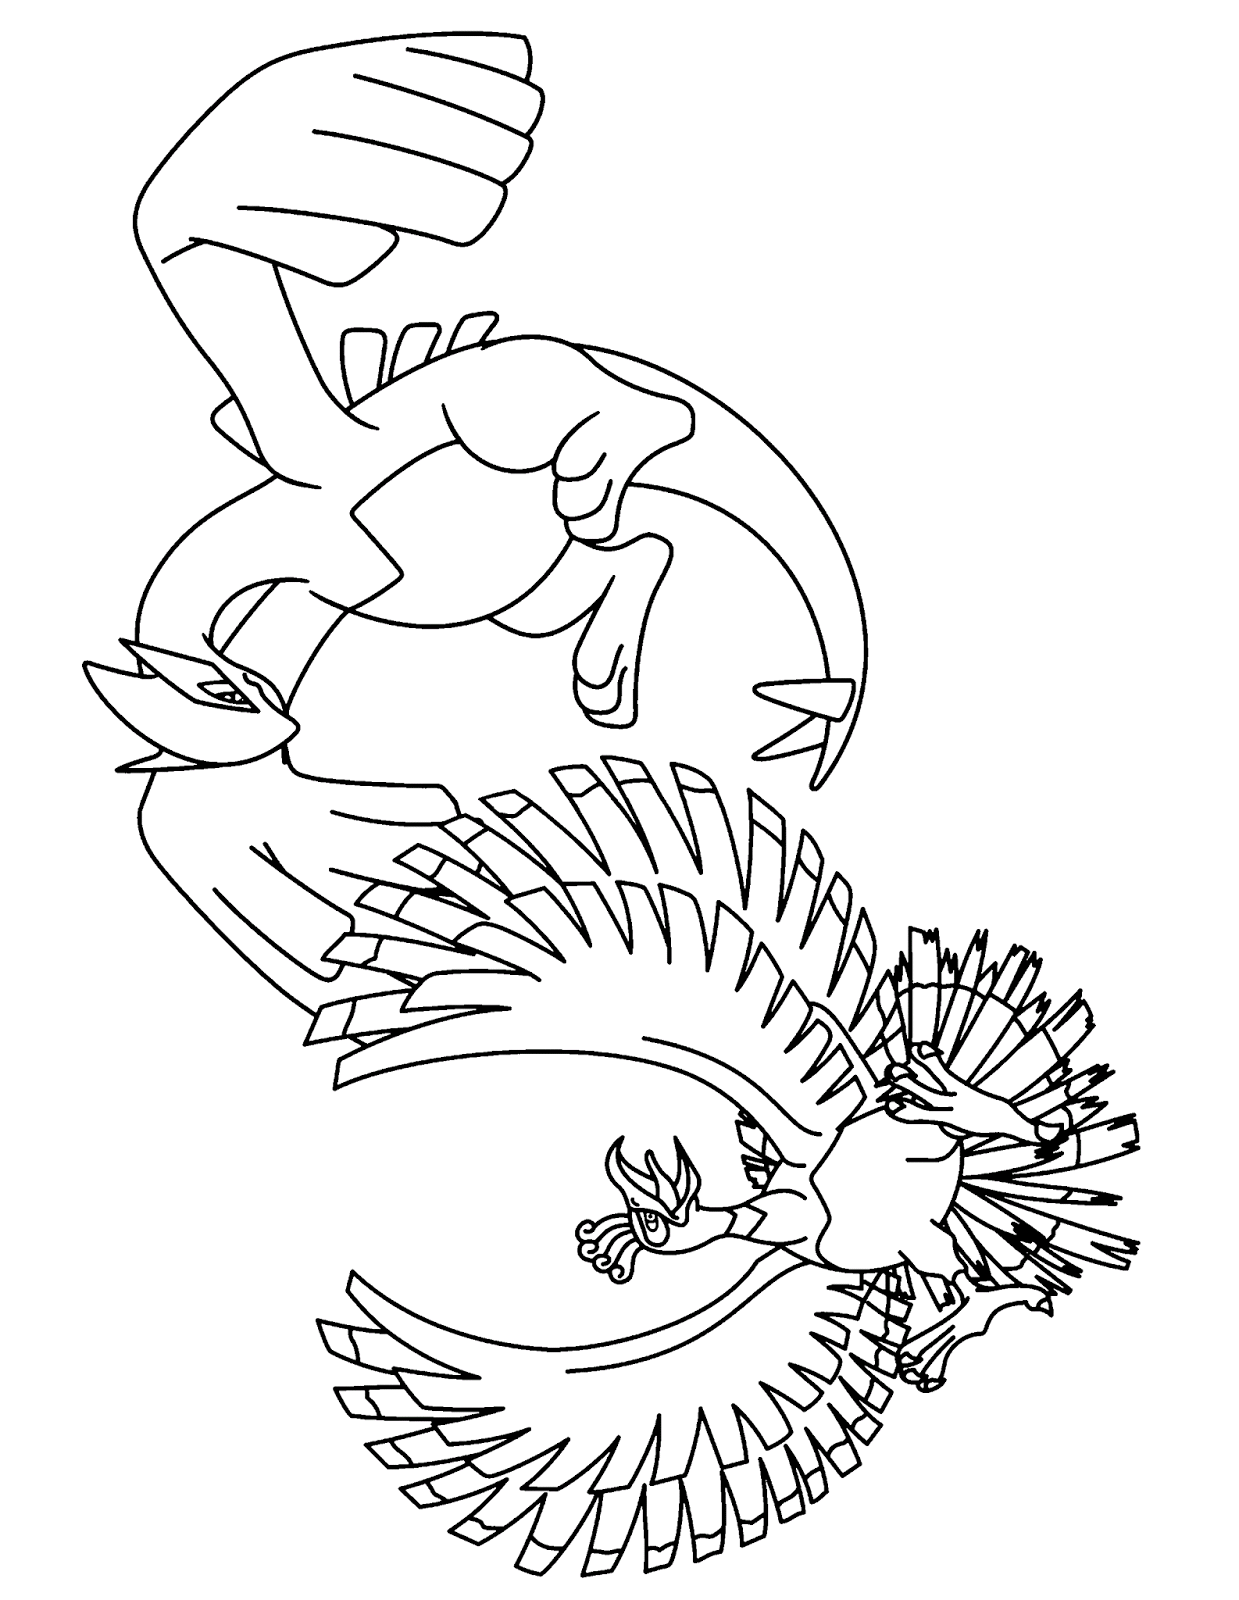 Lugia Pokemon Coloring Pages Coloring Pages